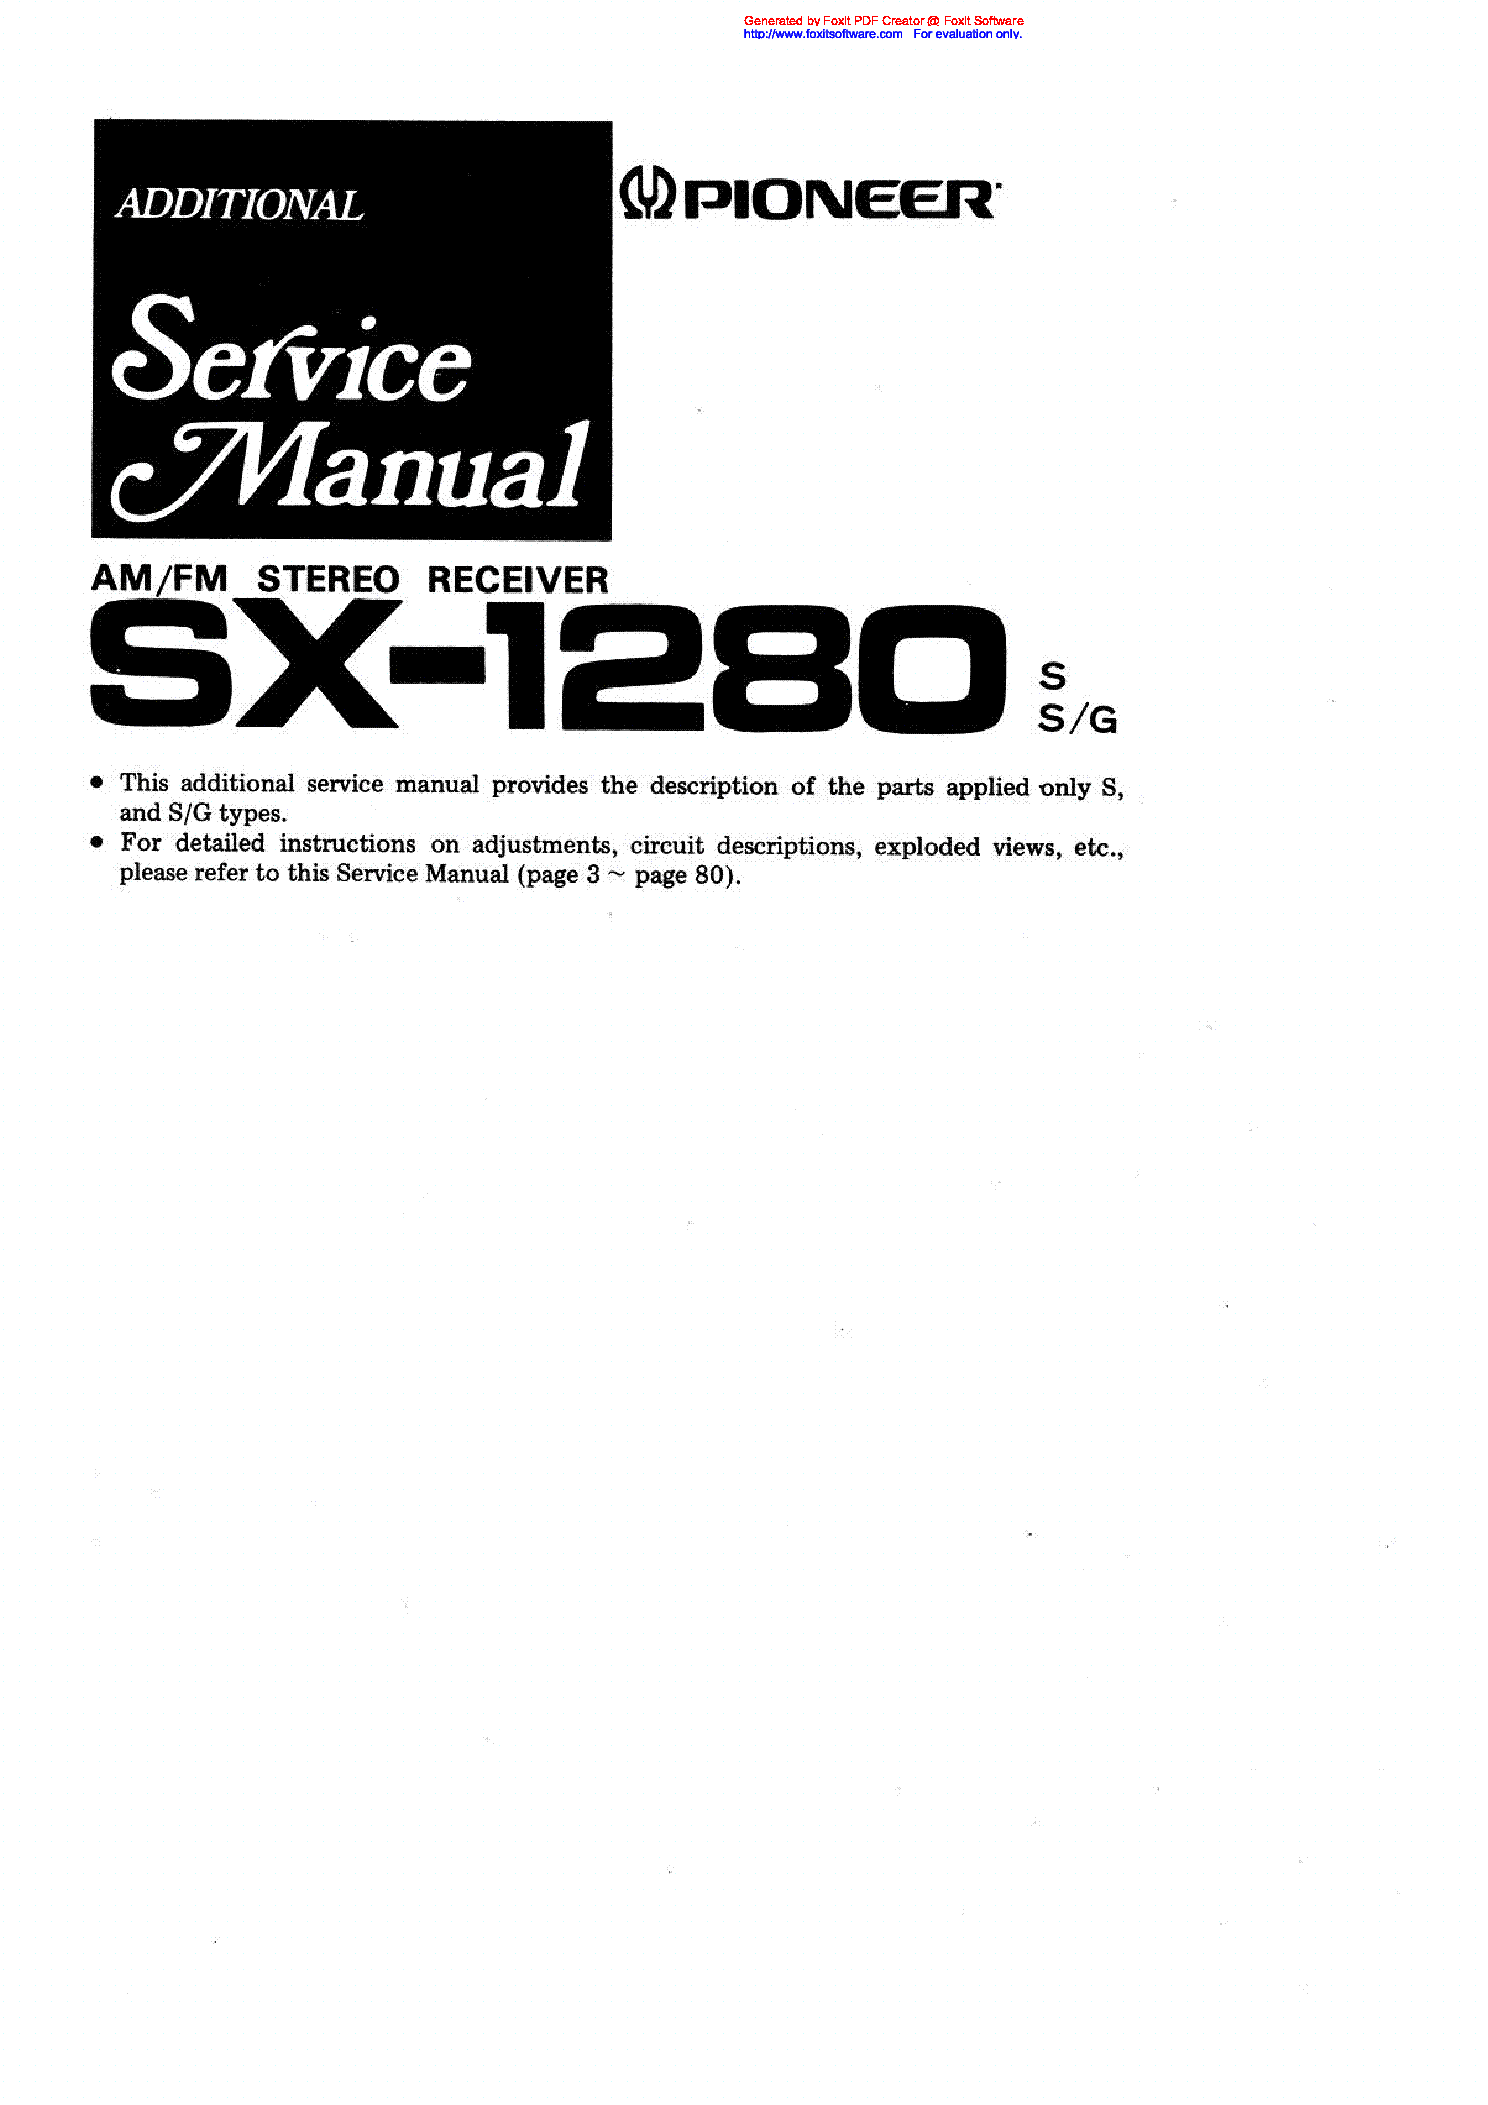 PIONEER SX-1280S,G service manual (1st page)